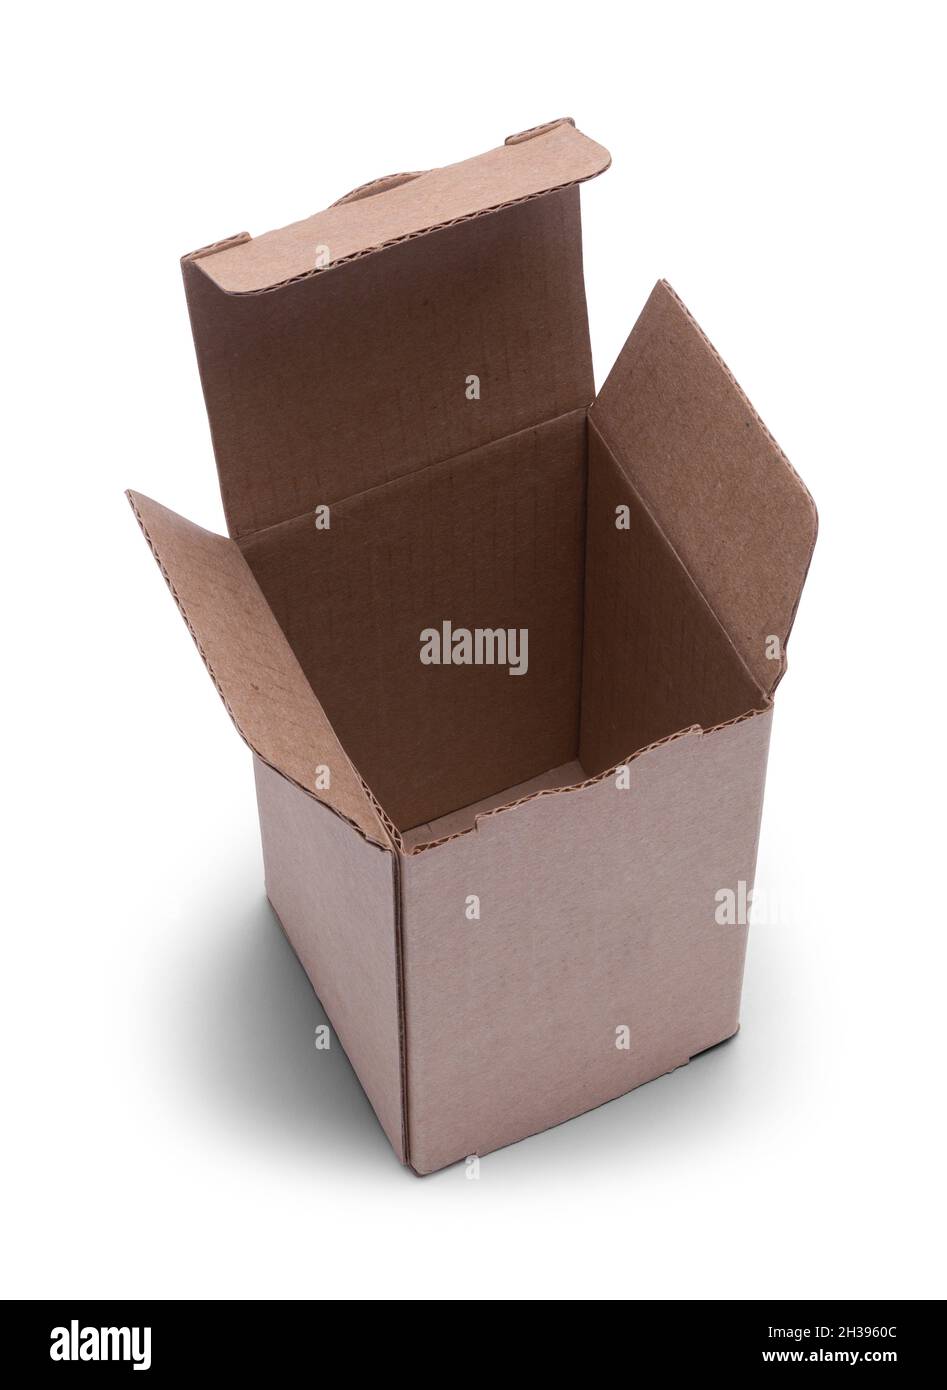 Open Rectangle Box Upright Cut Out on White. Stock Photo